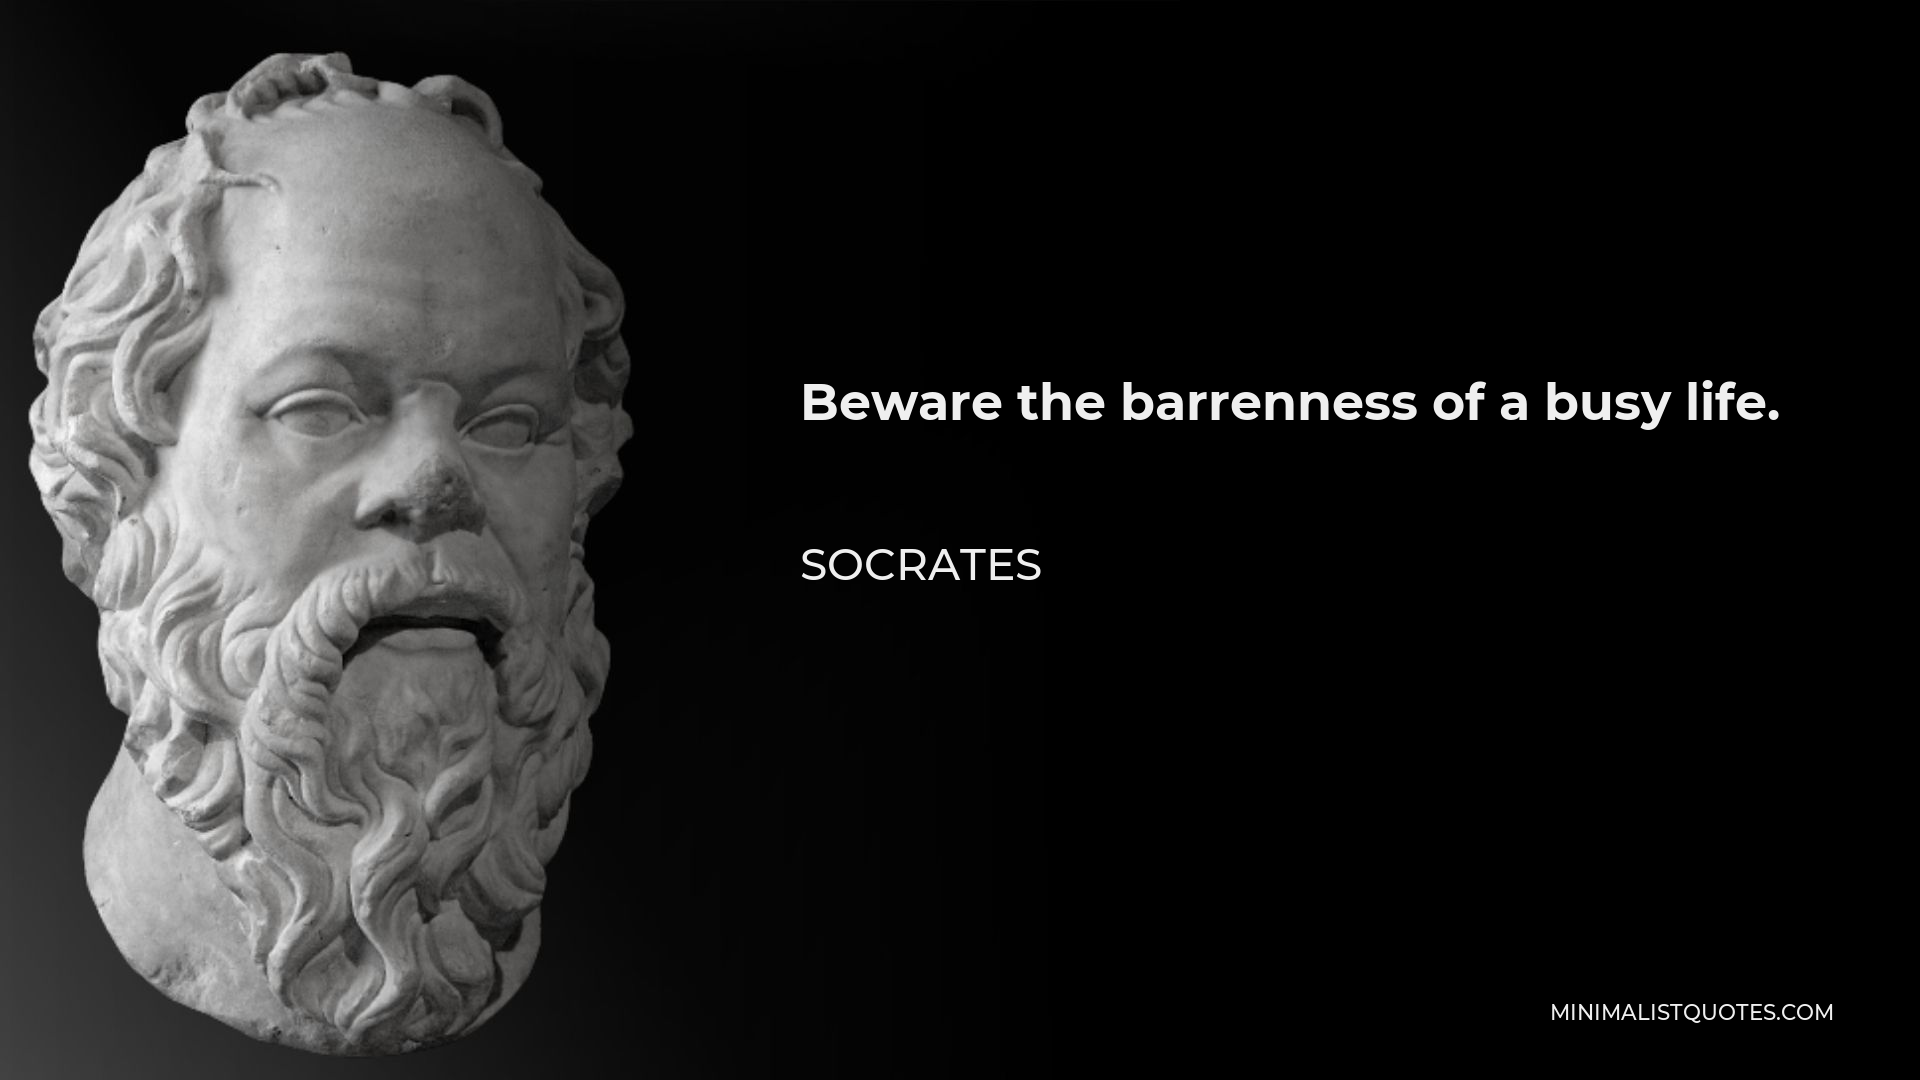 Socrates Quote - Beware the barrenness of a busy life.